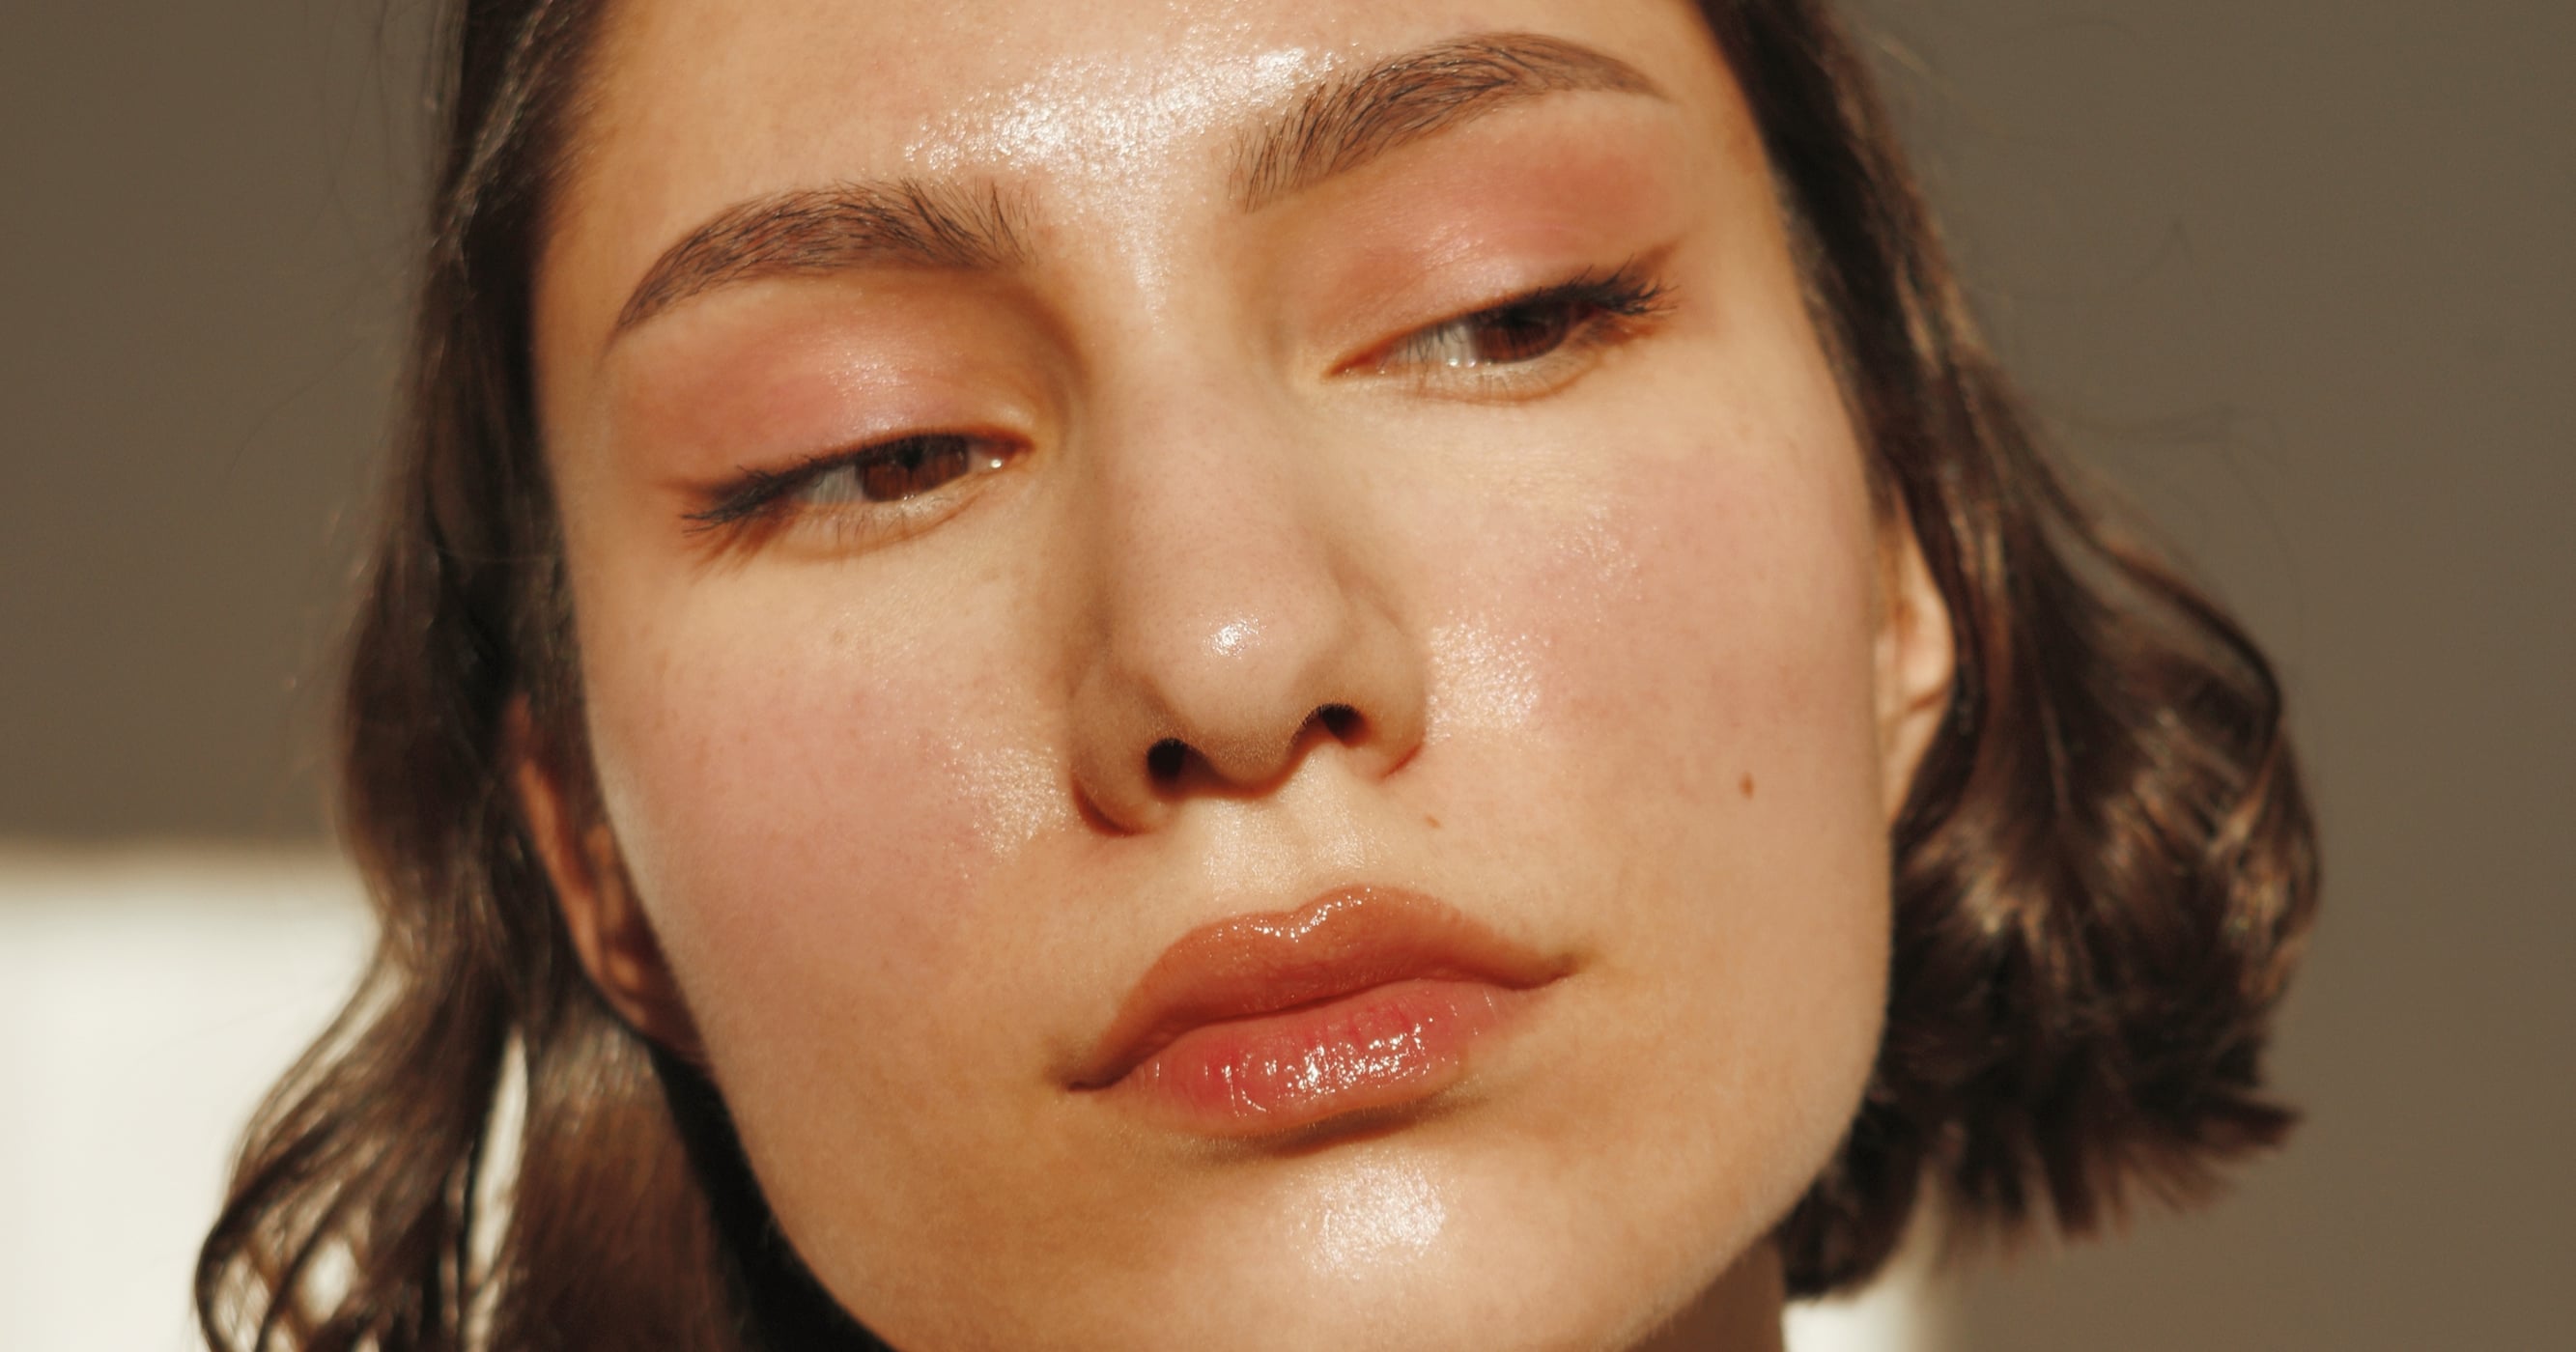 Skinny Brows Are Back — Here’s How to Fake the Look Without Tweezing